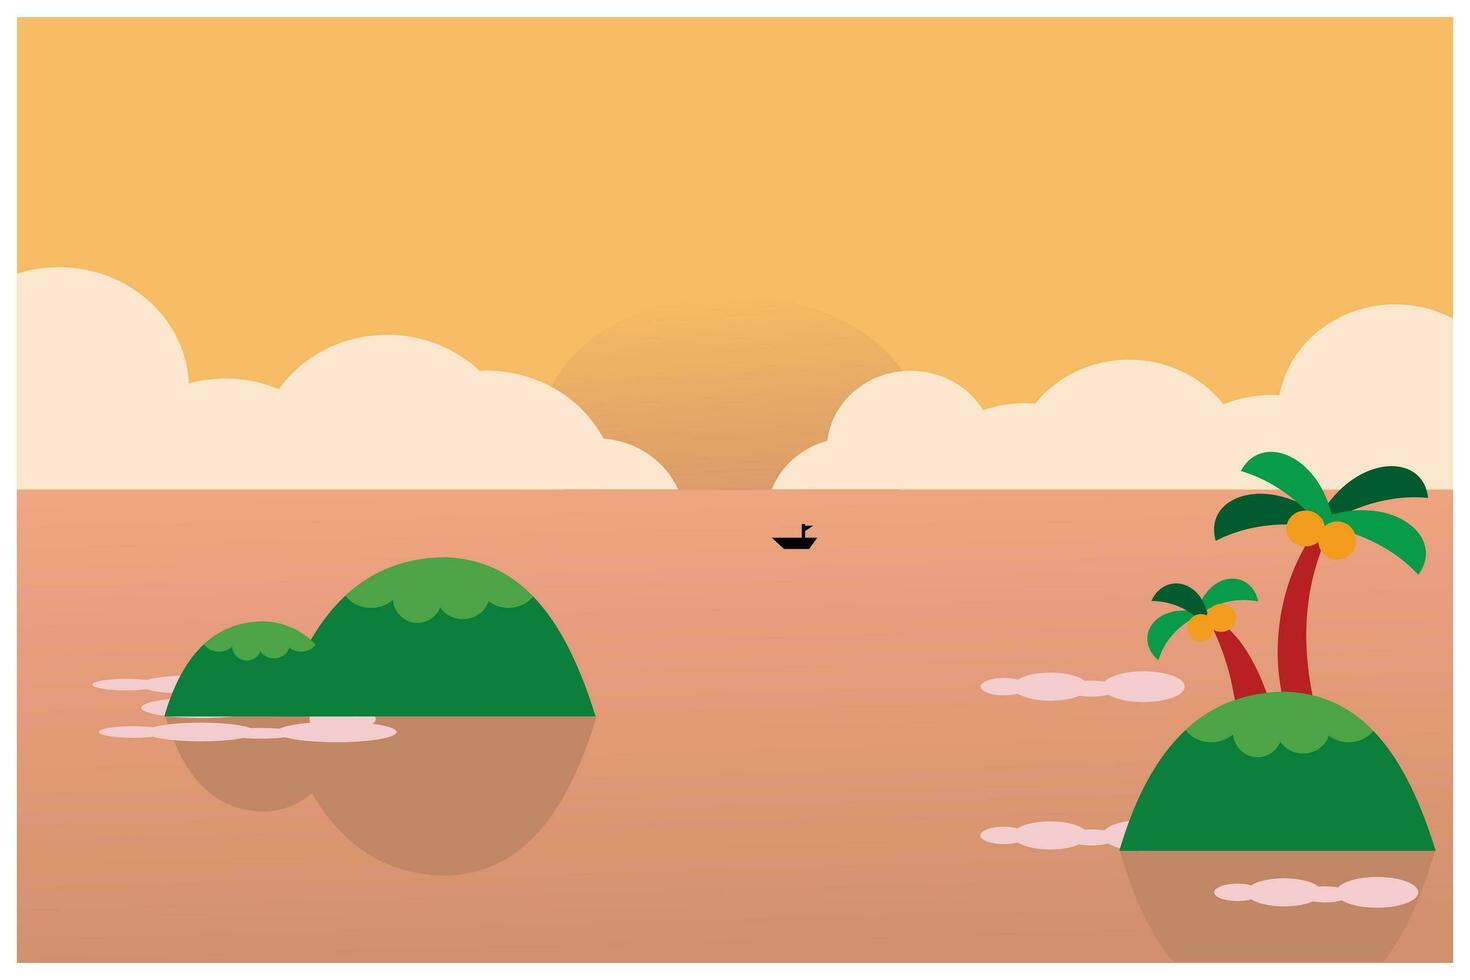 beach and sea with palm trees, vector illustration in flat style. Illustration of the vast ocean with clouds and the silhouette of a sunset between the clouds. Ocean with islands and fishermen